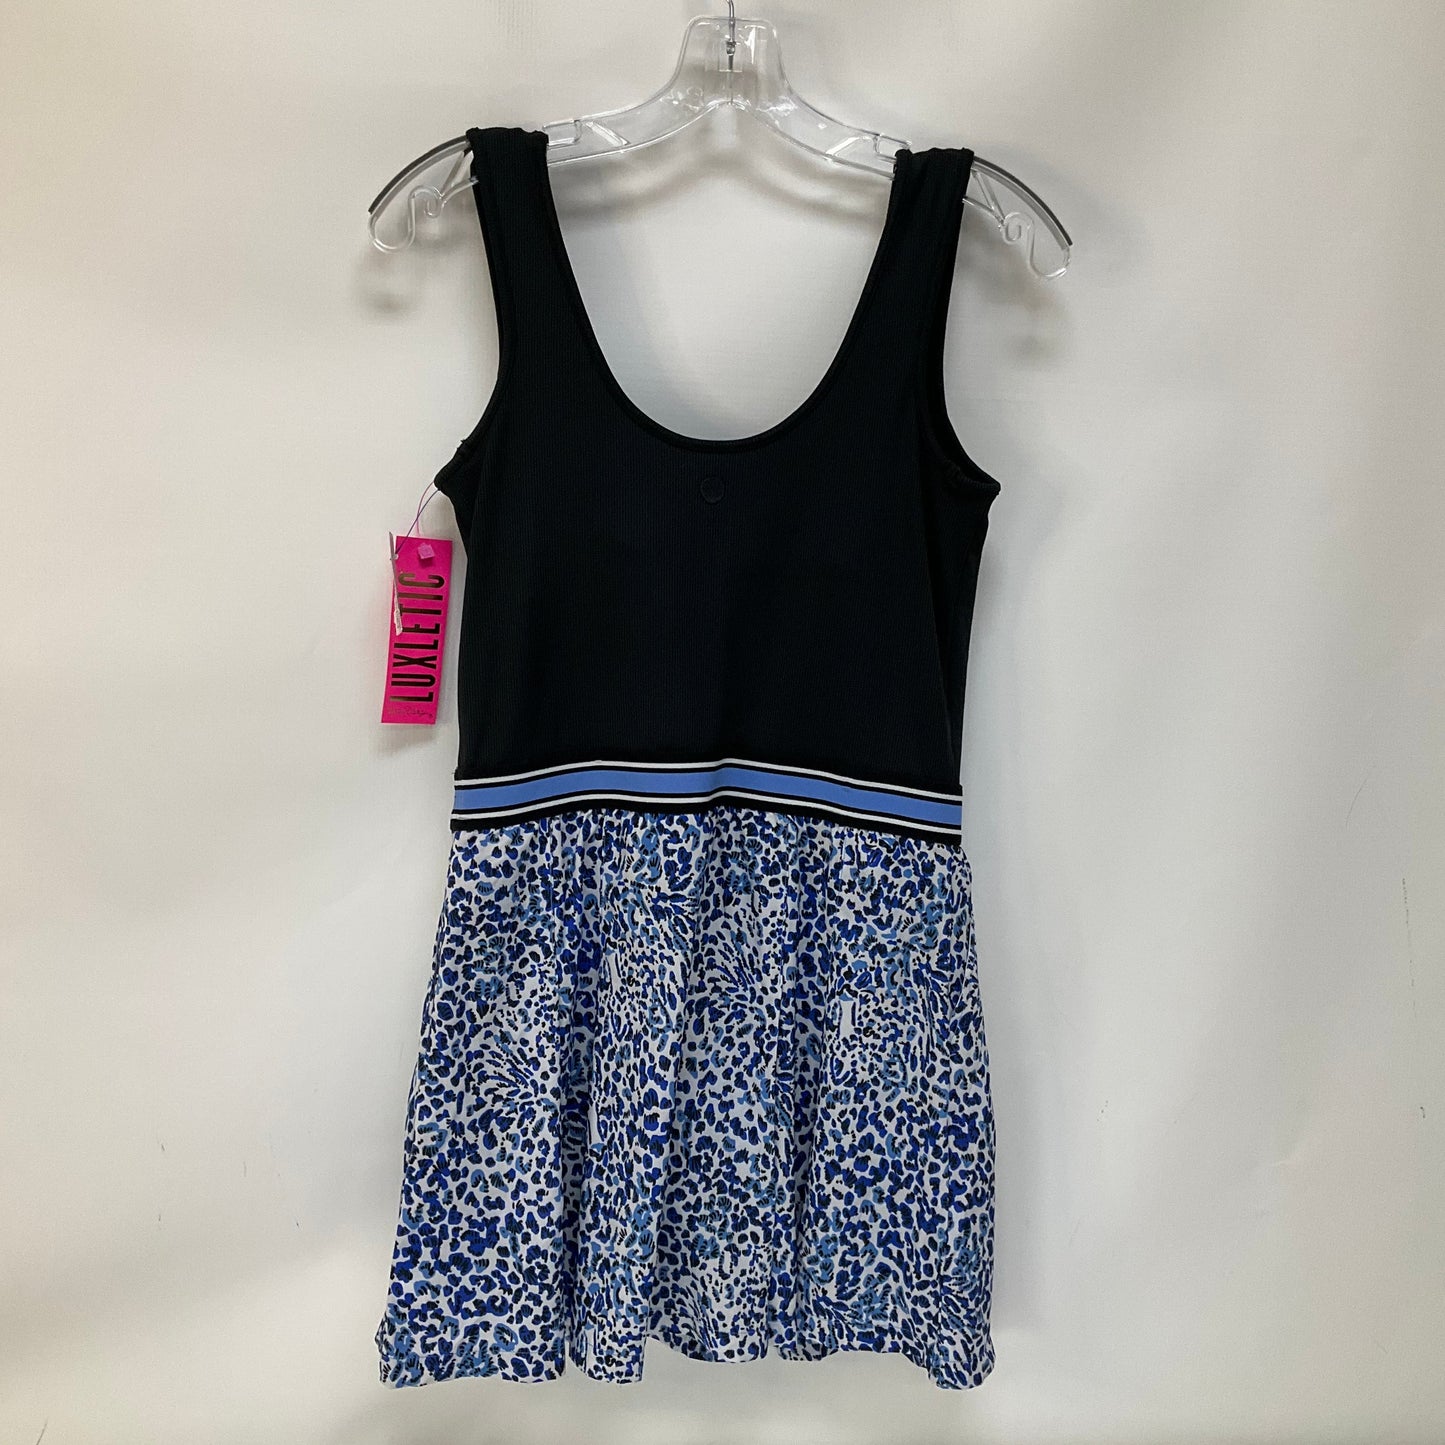 Athletic Dress By Lilly Pulitzer  Size: S